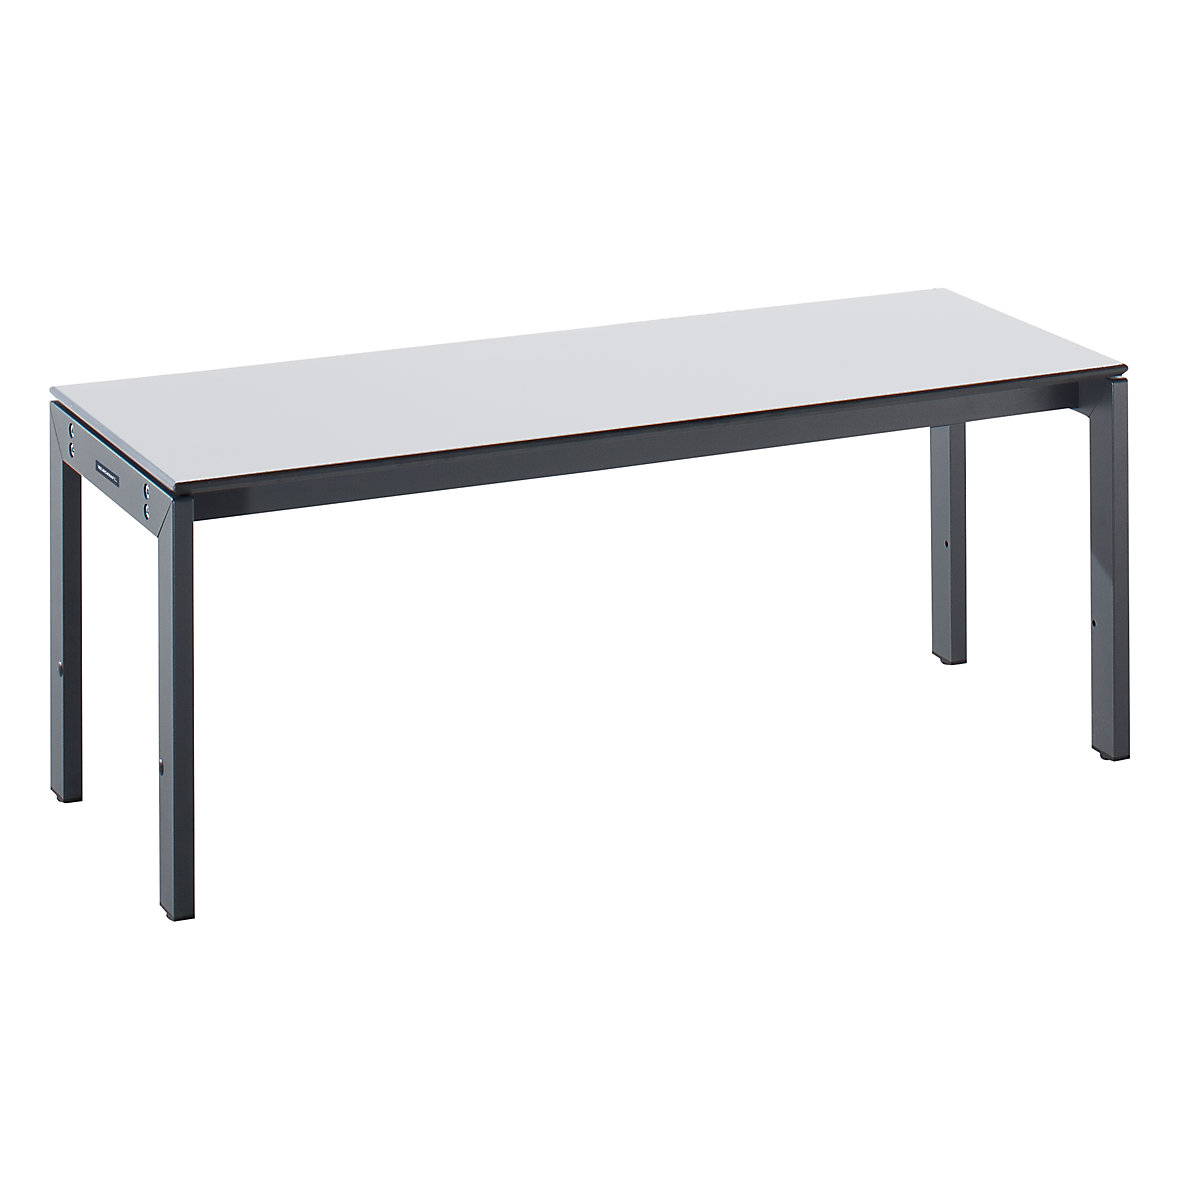 EUROKRAFTpro – Changing room bench with steel frame, LxHxD 1000 x 415 x 400 mm, light grey seat